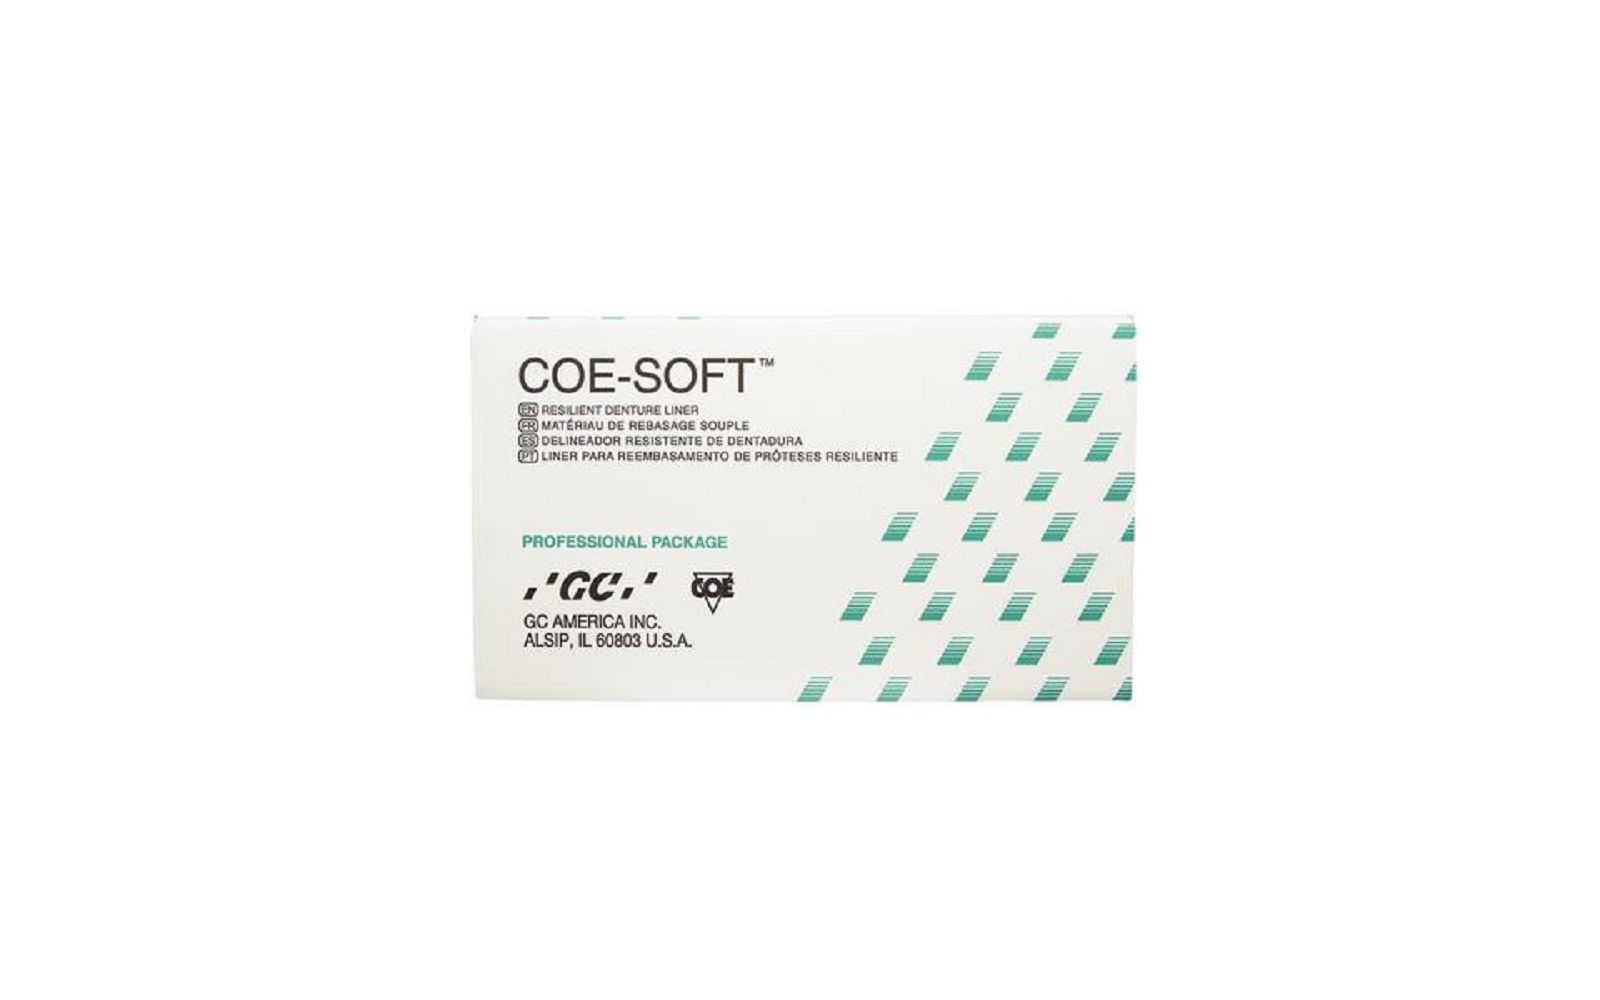 Coe-soft™ resilient denture liner – professional package